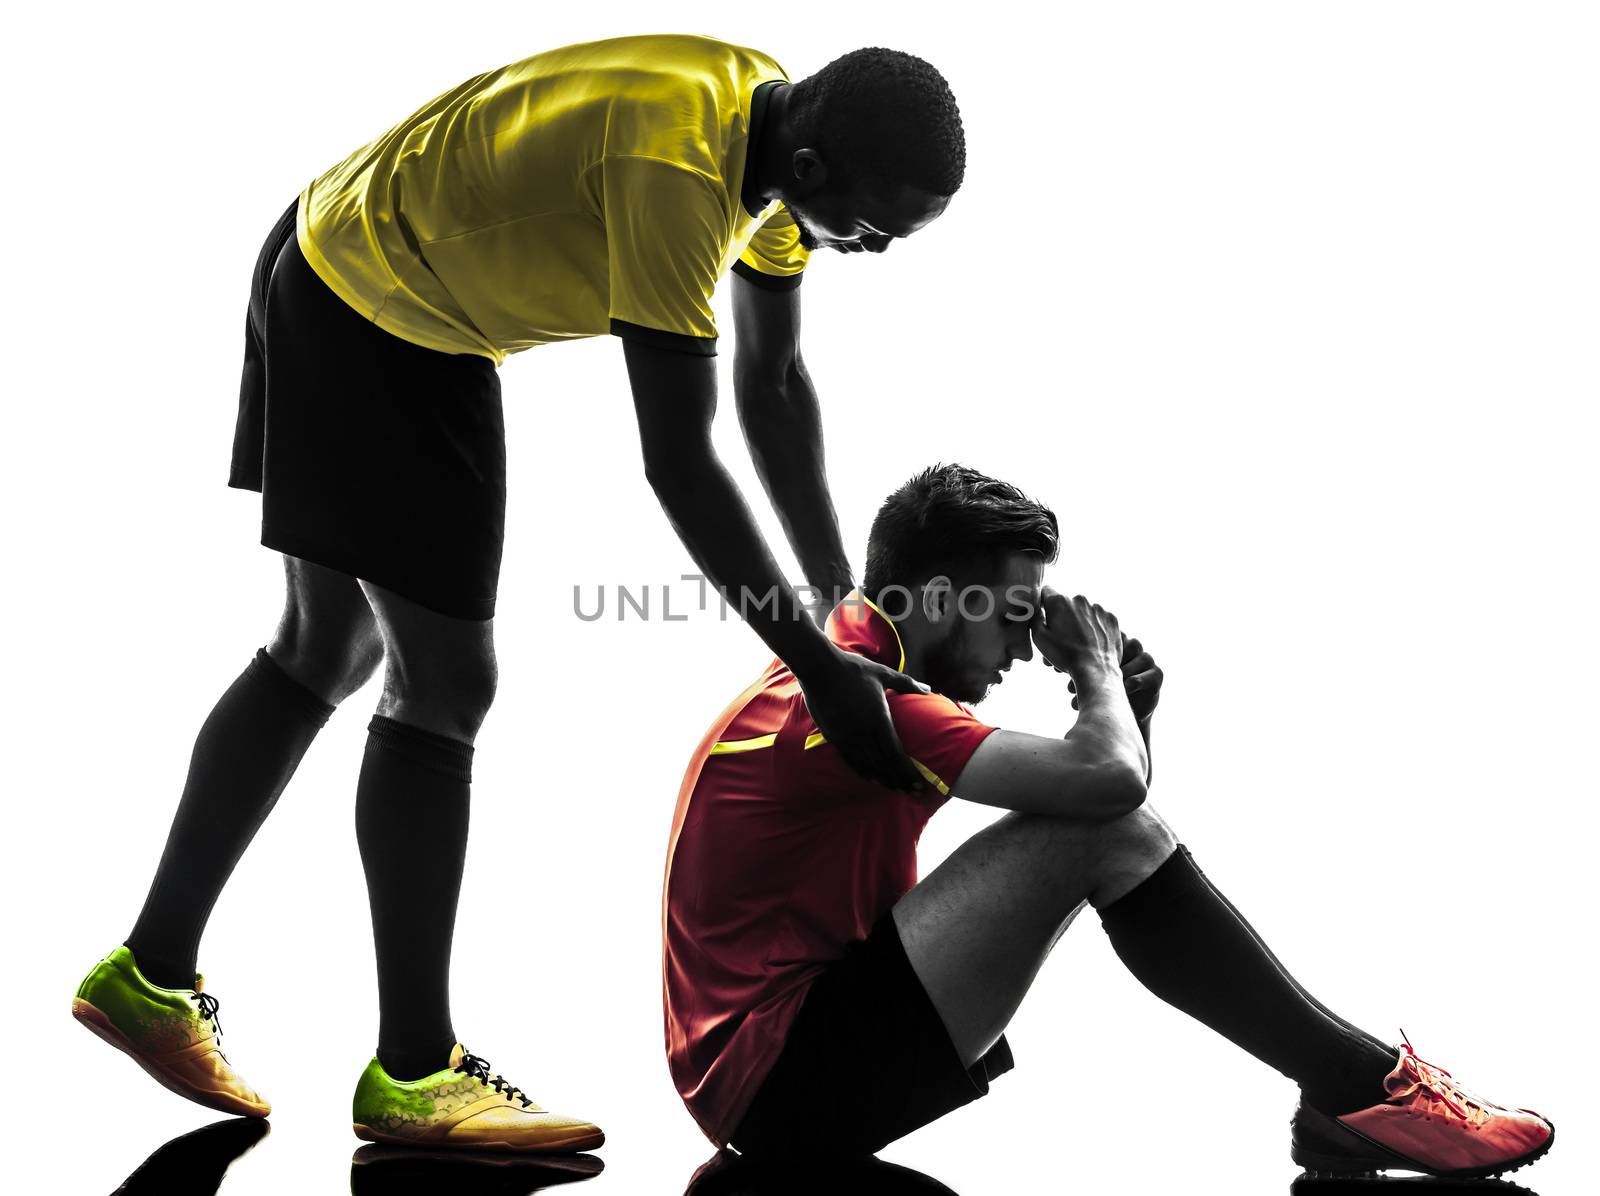 two men soccer player  fair play concept  silhouette by PIXSTILL